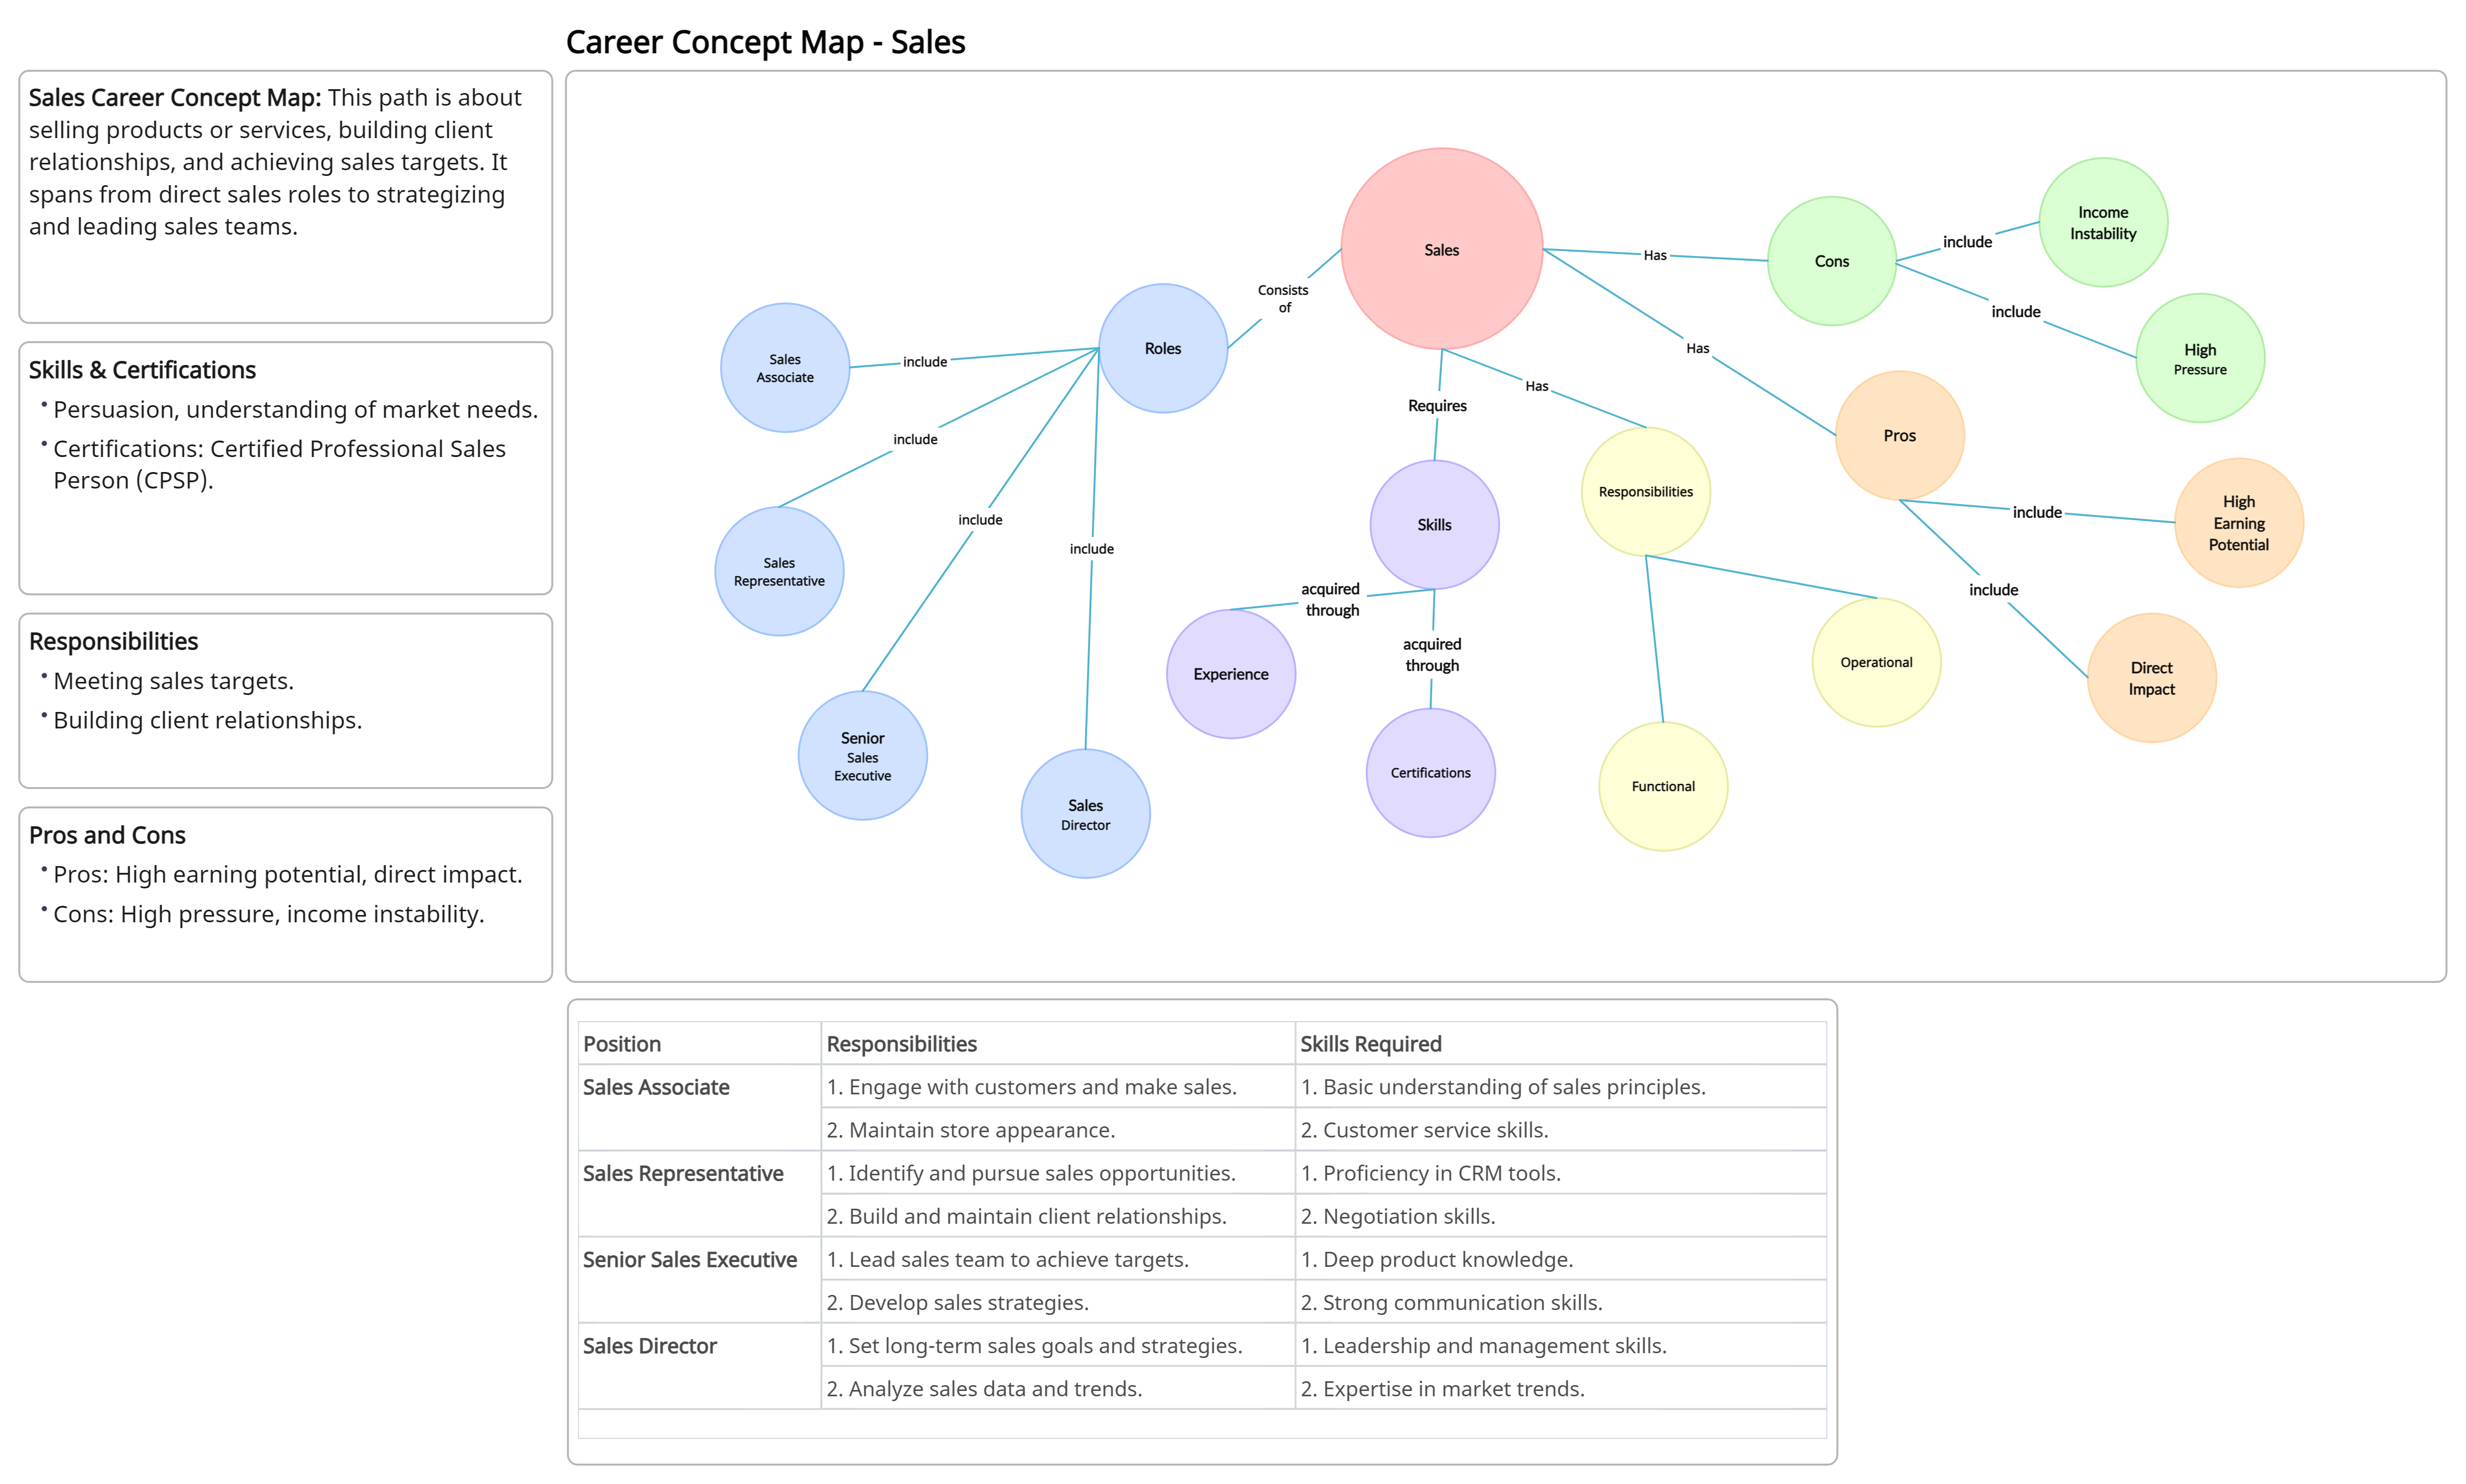 Sales Career Concept Map